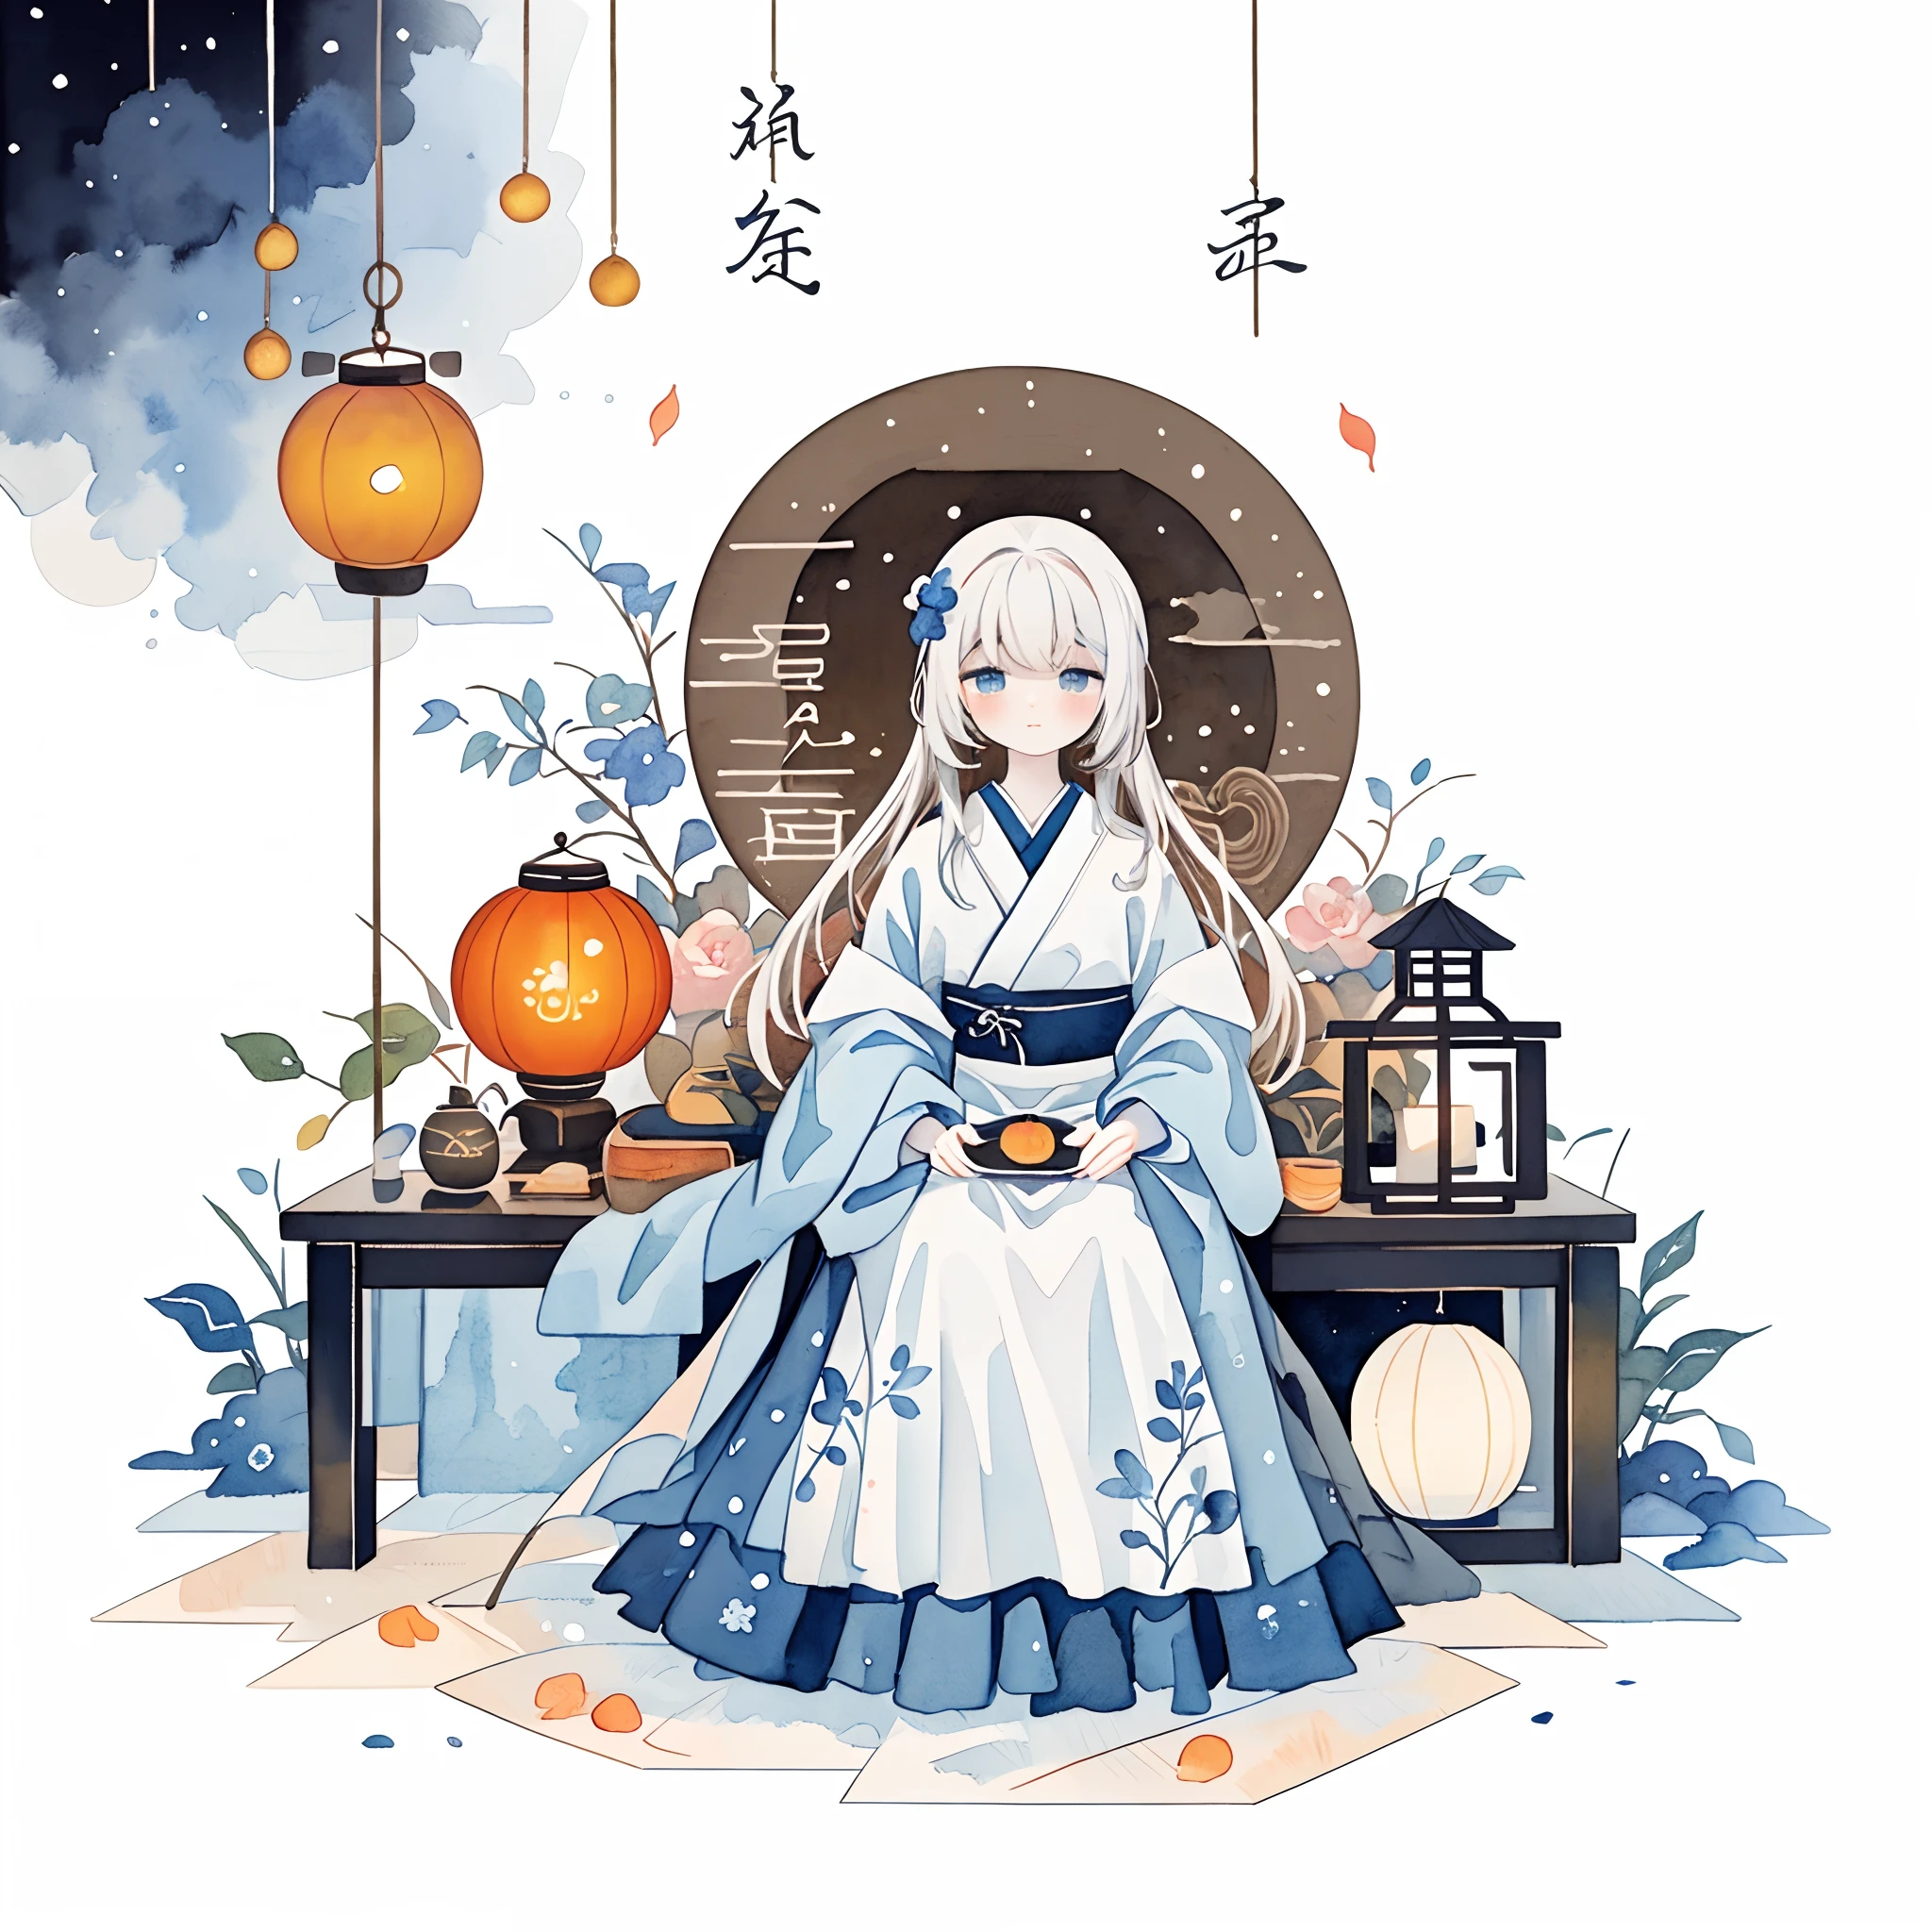 (pastelcolor:1.3)、(cute illustration:1.3)、(watercolor paiting:1.1),（A rabbit：1.4）, sat on the ground, Looking up, （（Mid-Autumn Festival atmosphere，sweet osmanthus，Kongming Lantern，Meniscuoon cake：1.3）），（Chinese kanji：1.3），Traditional Chinese illustration style, Digital art, Simple background, Masterpiece on white background, Best quality, Ultra-detailed, High quality, 4K